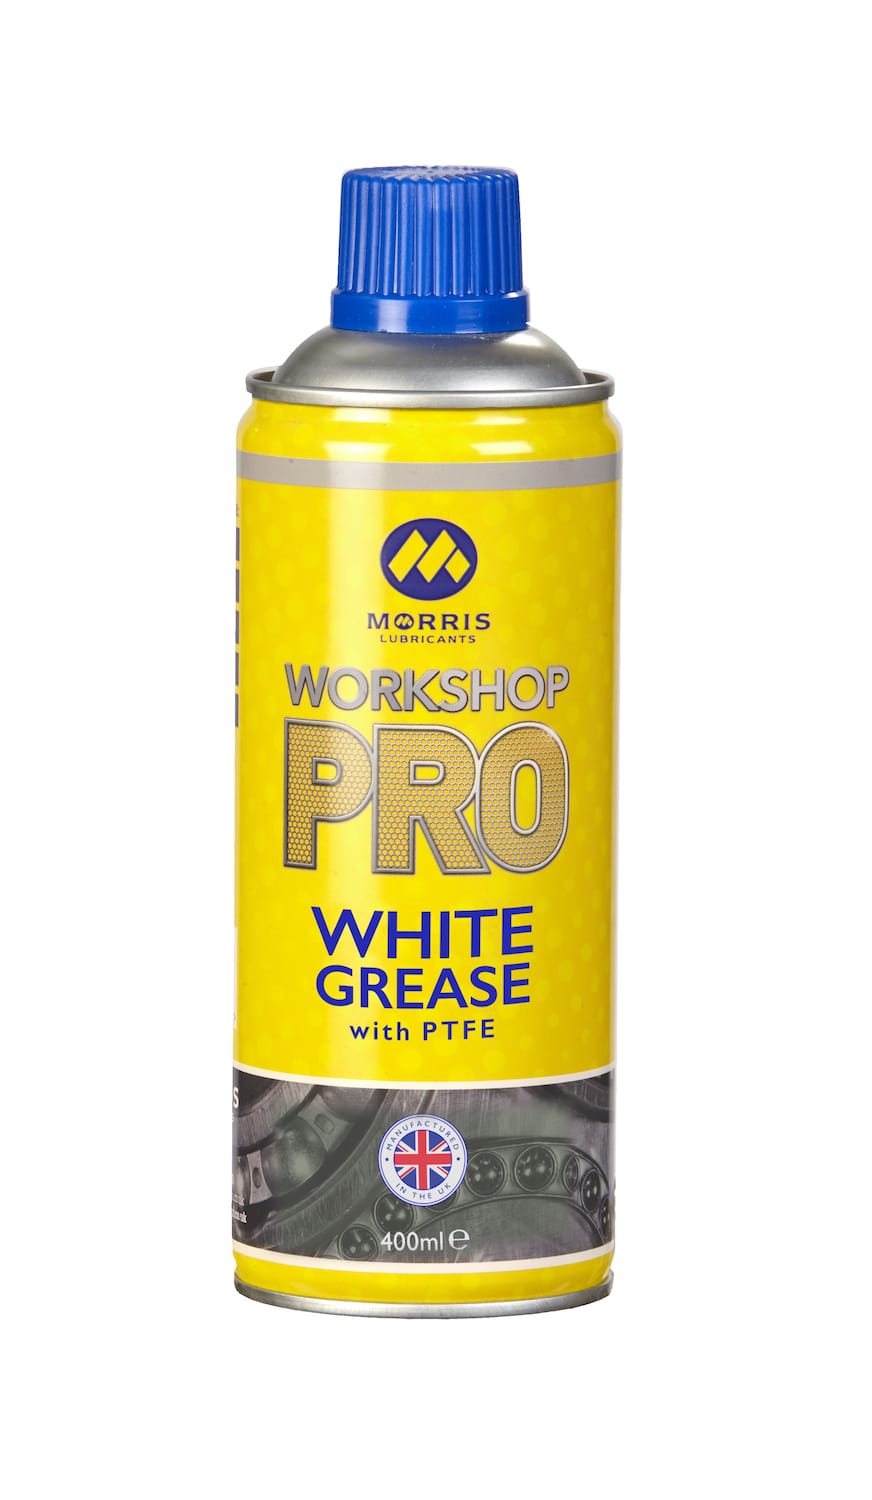 Workshop Pro White Spray Grease with PTFE